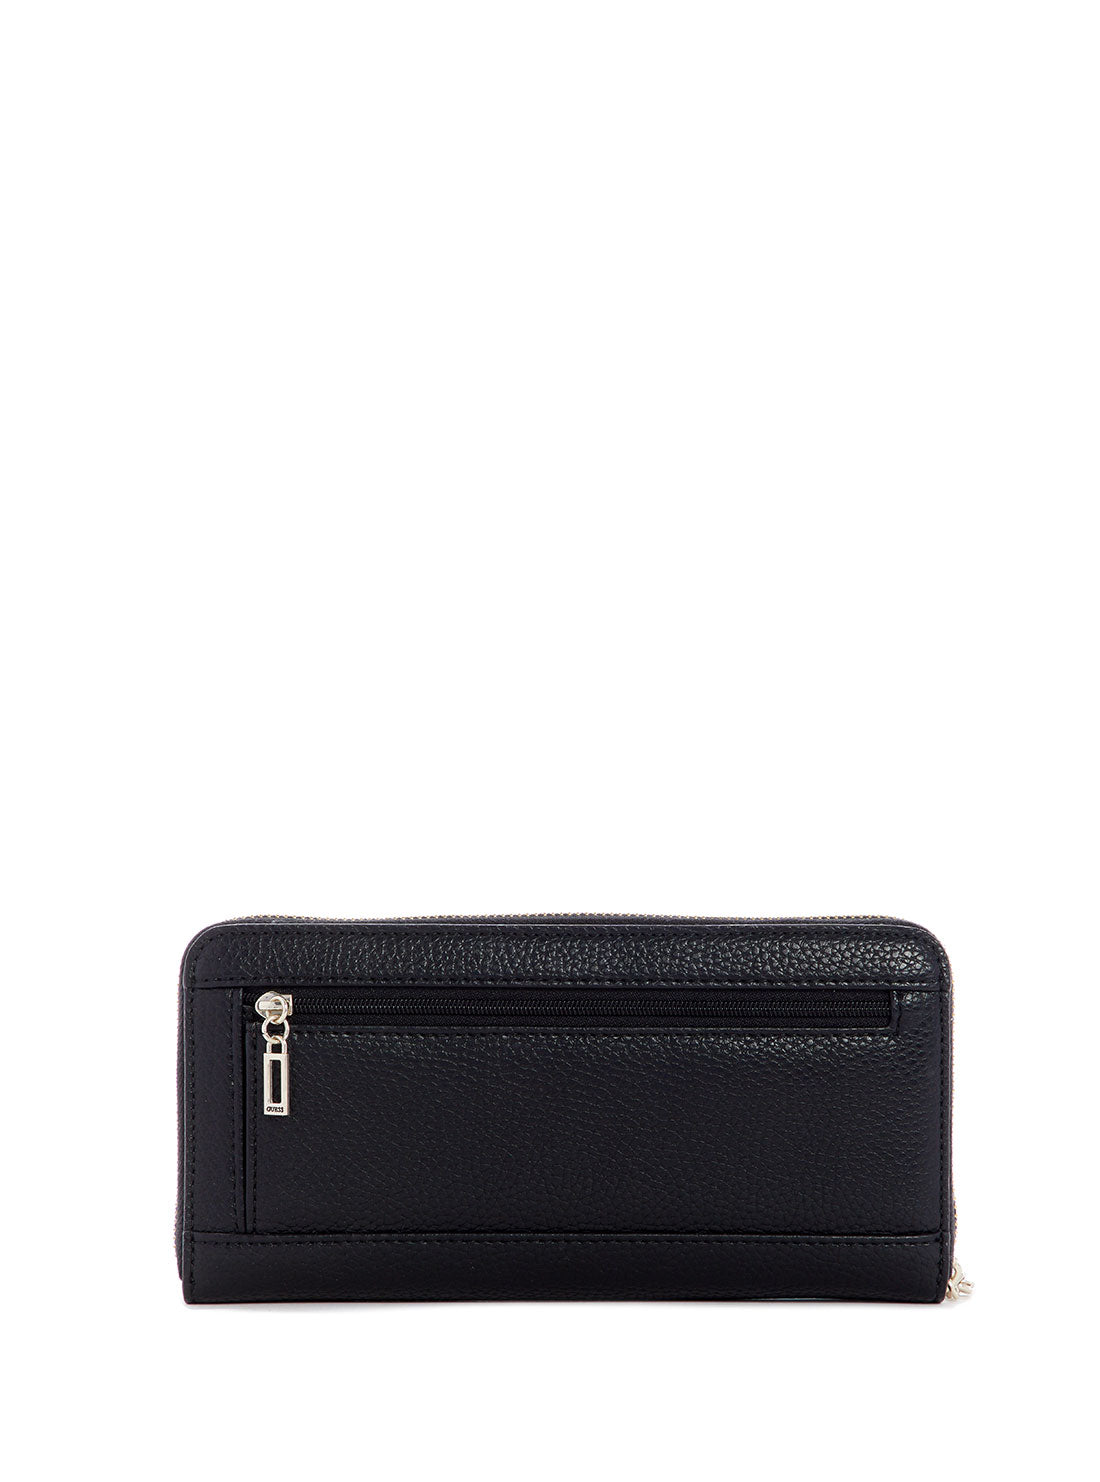 GUESS Black Large Zip Around Wallet back view